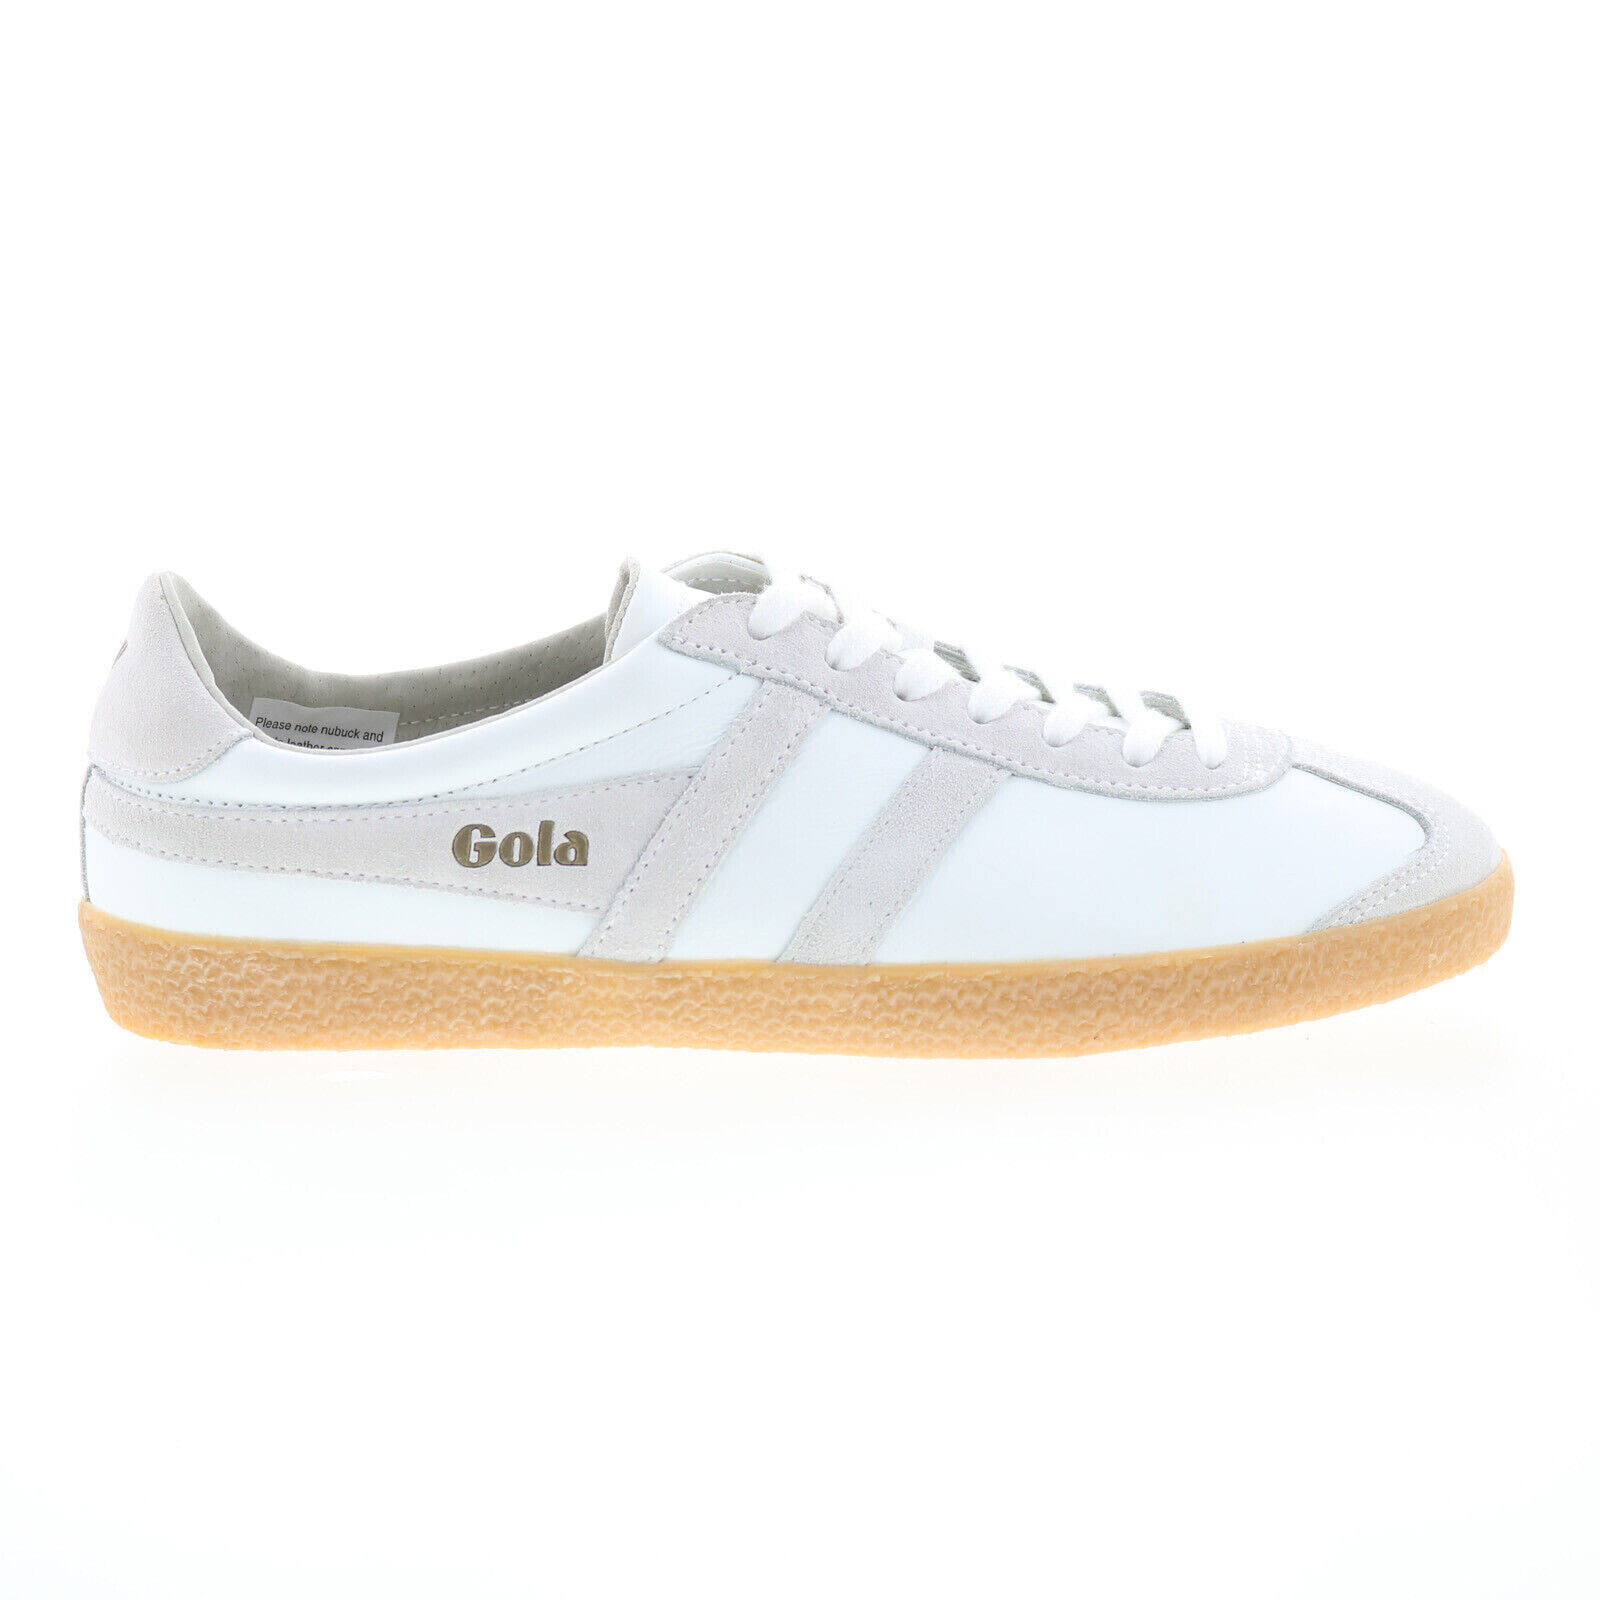 Gola Specialist Leather CMA598 Mens White Leather Lifestyle Sneakers Shoes 9